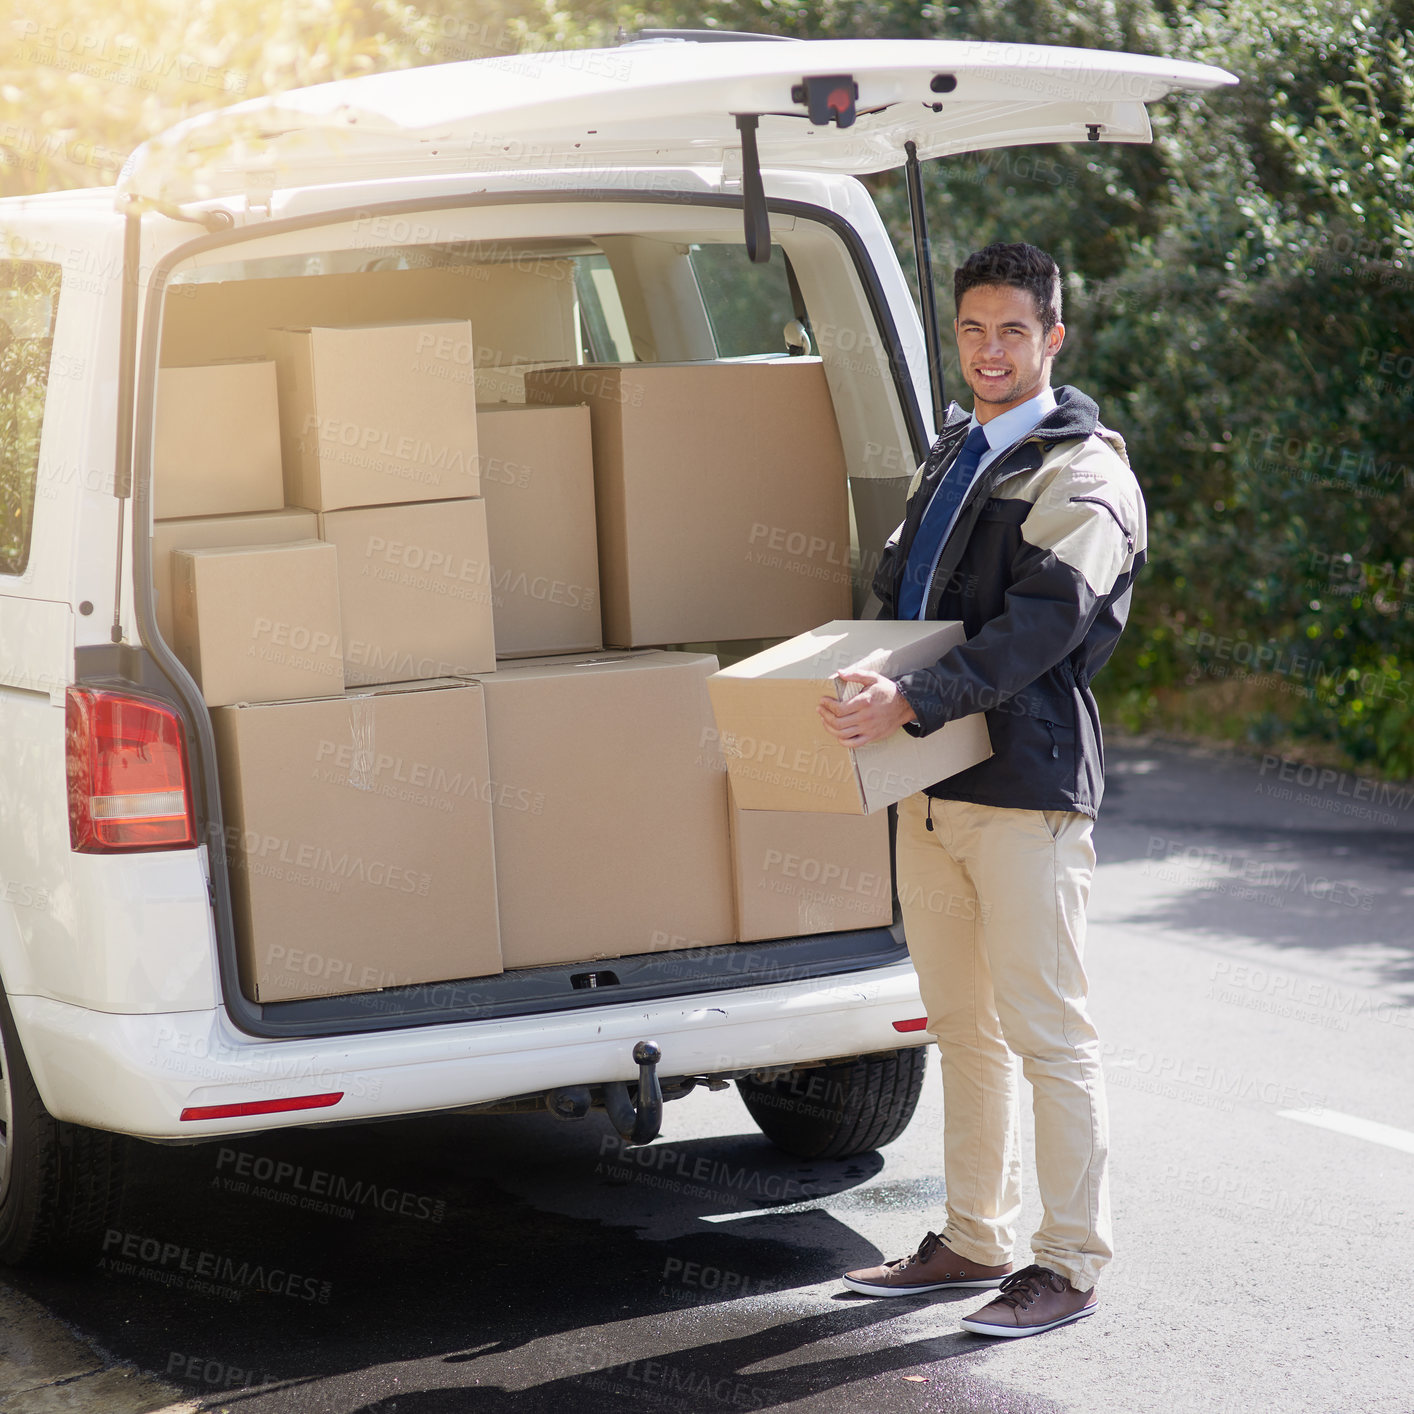 Buy stock photo Portrait of a friendly delivery man unloading cardboard boxes from his van